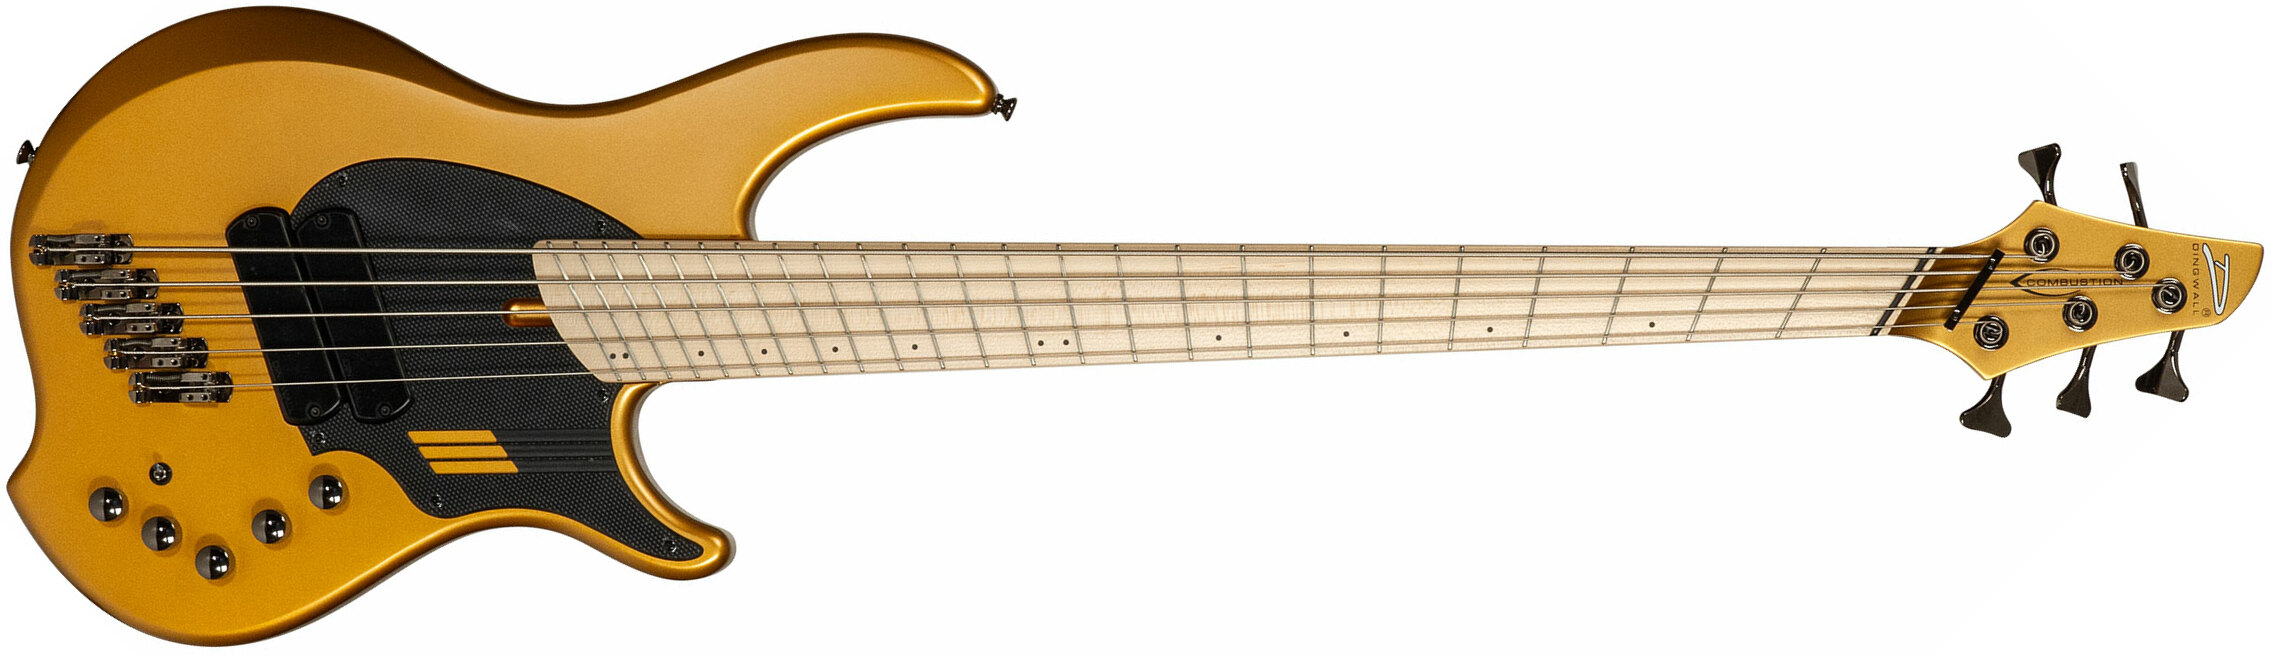 Dingwall Adam Nolly Getgood Ng2 5c Signature 2pu Active Mn - Gold Matte - Solid body elektrische bas - Main picture